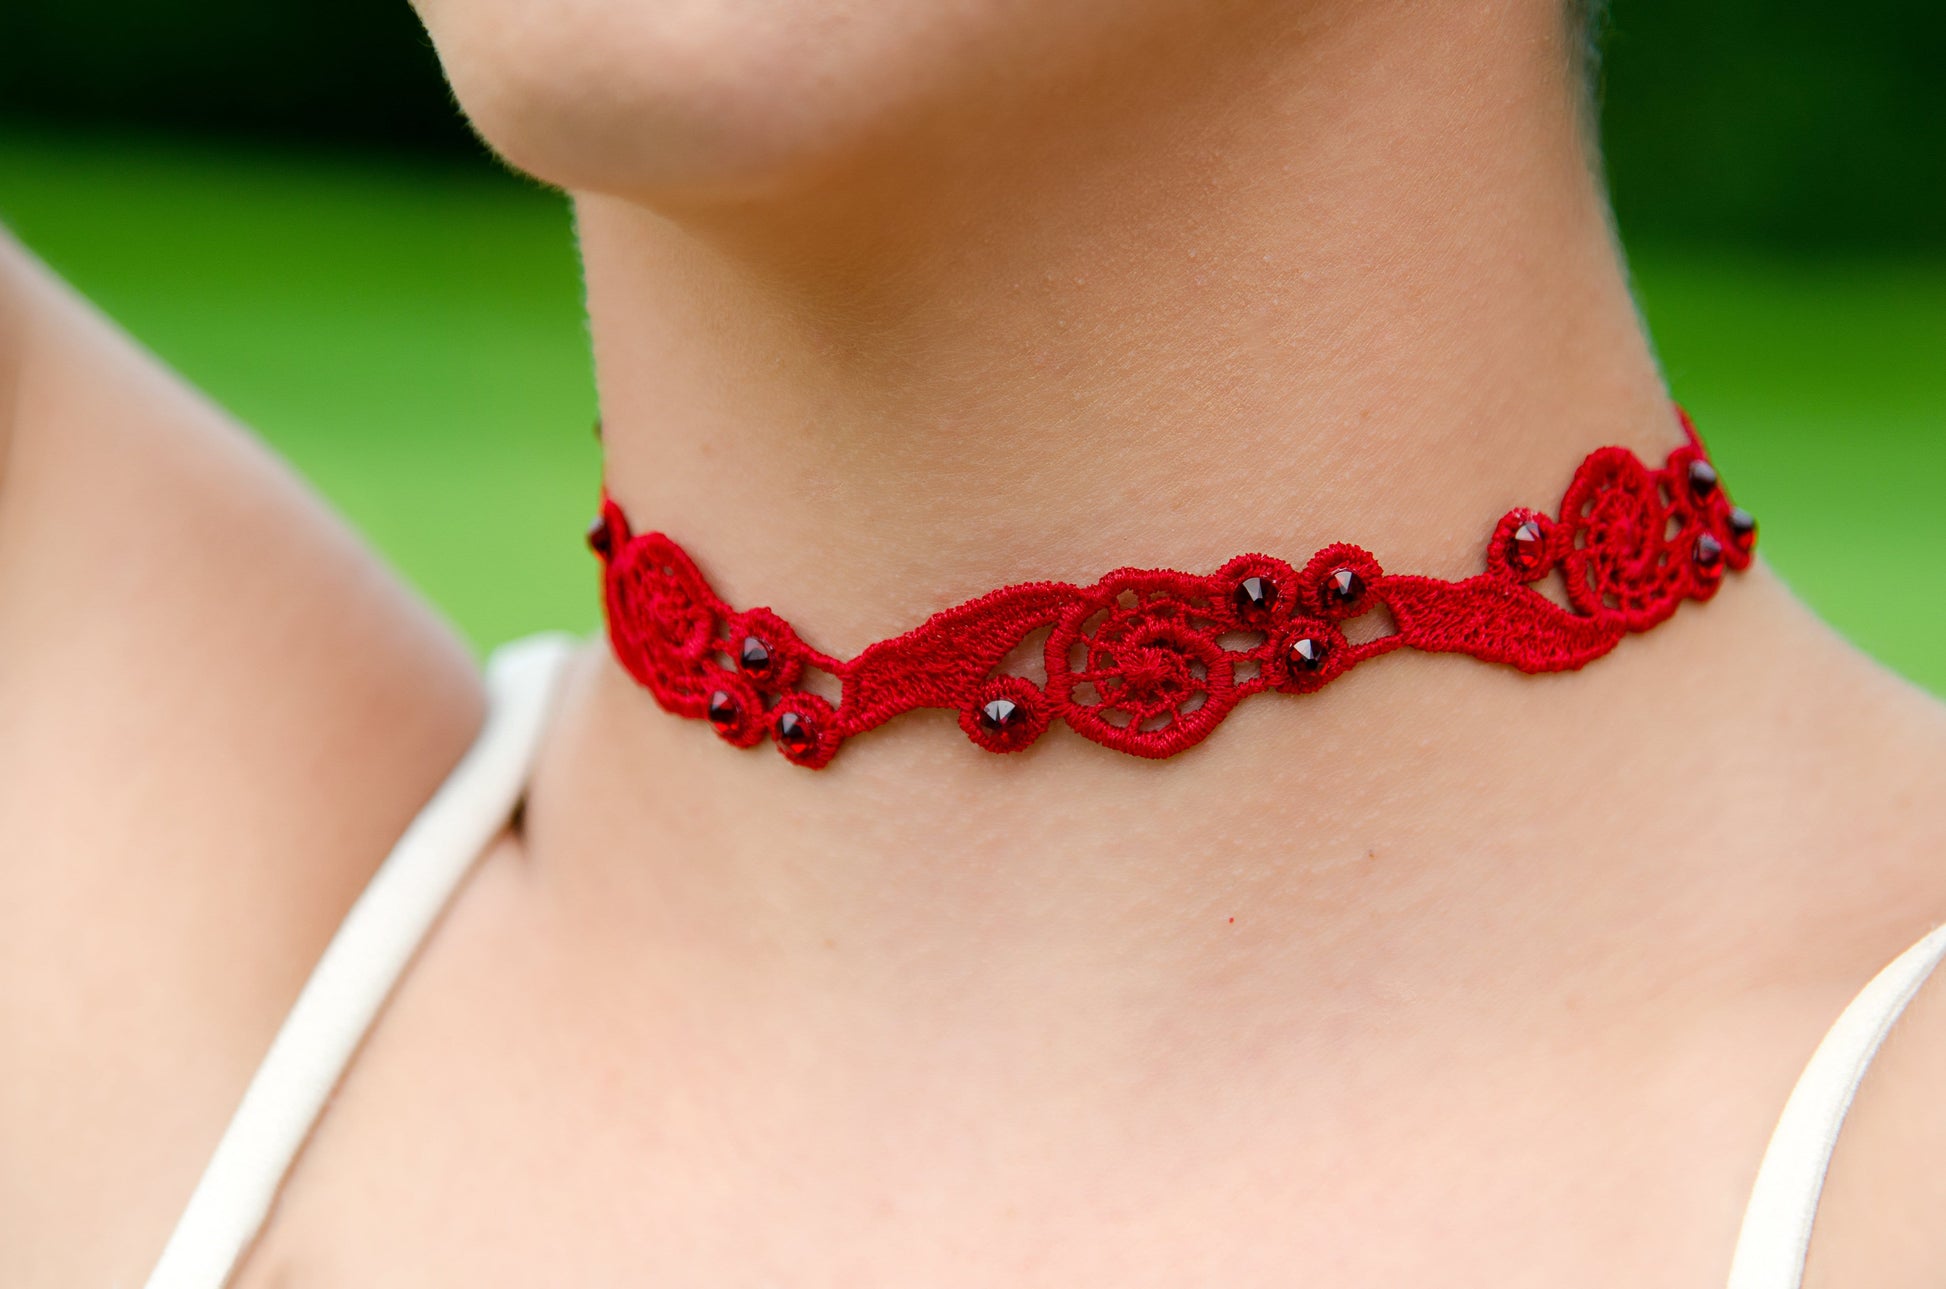 Red Coker Necklace made with red lace embellished with red rhinestones